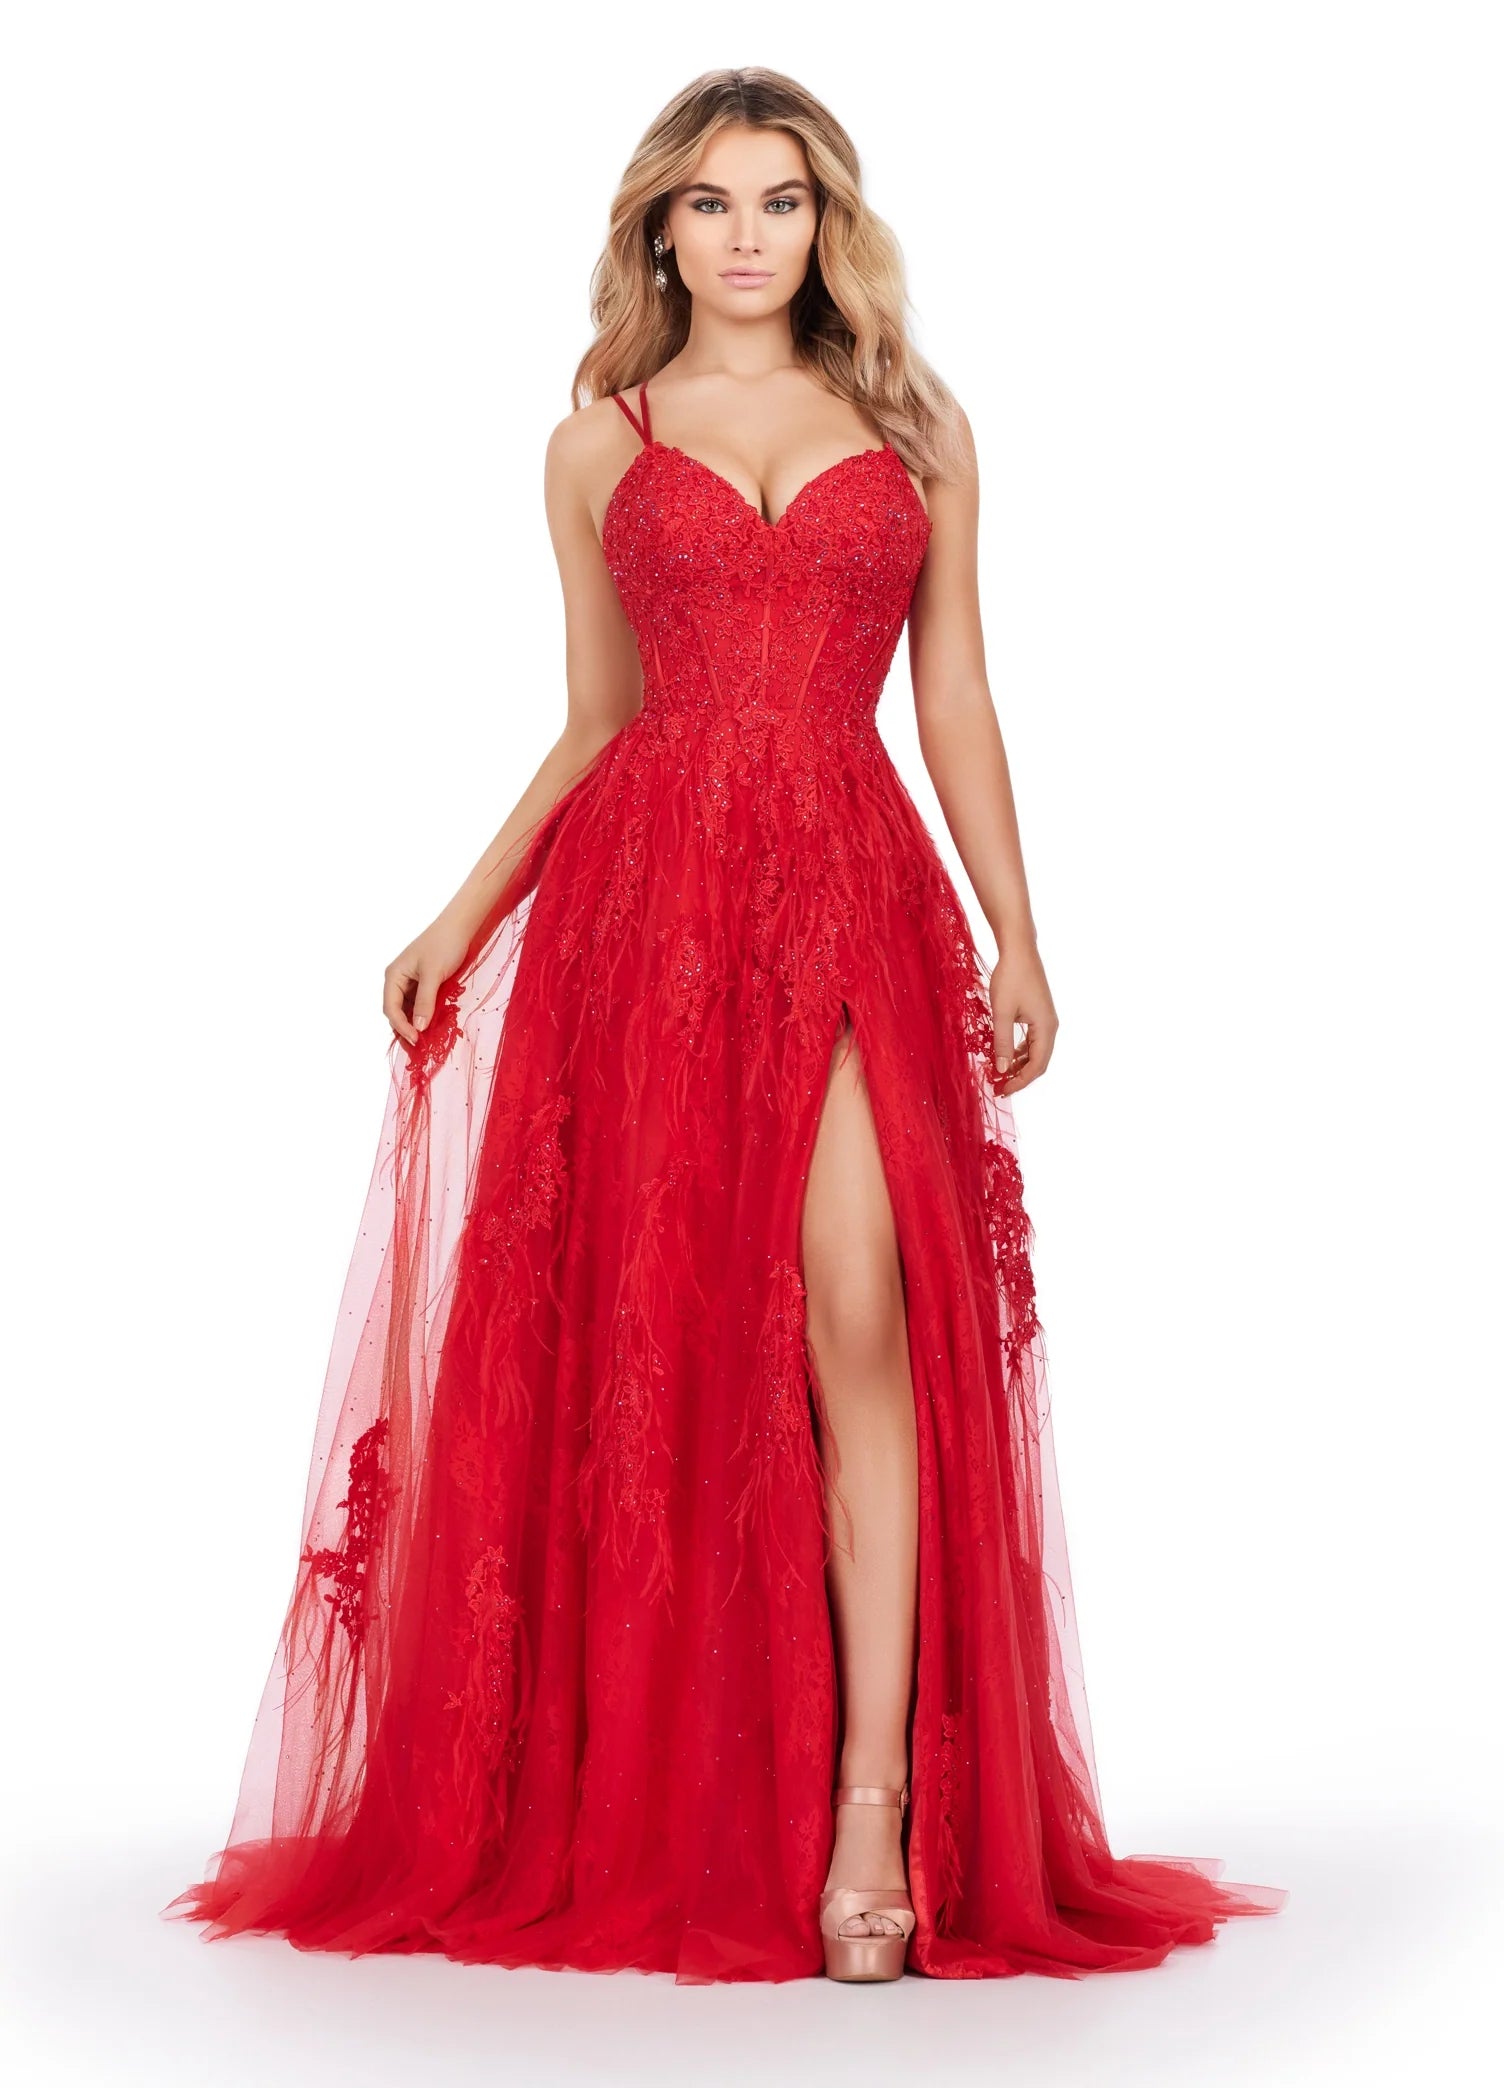 This Ashley Lauren 11480 dress is a stunningly unique piece for your next special event. Featuring intricate lace and feather detailing, a slim a-line fit with a thigh-high slit, a corset bodice, and an elegant low-back, this dress will be sure to draw attention. Perfect for prom, pageants, or any formal occasion. 